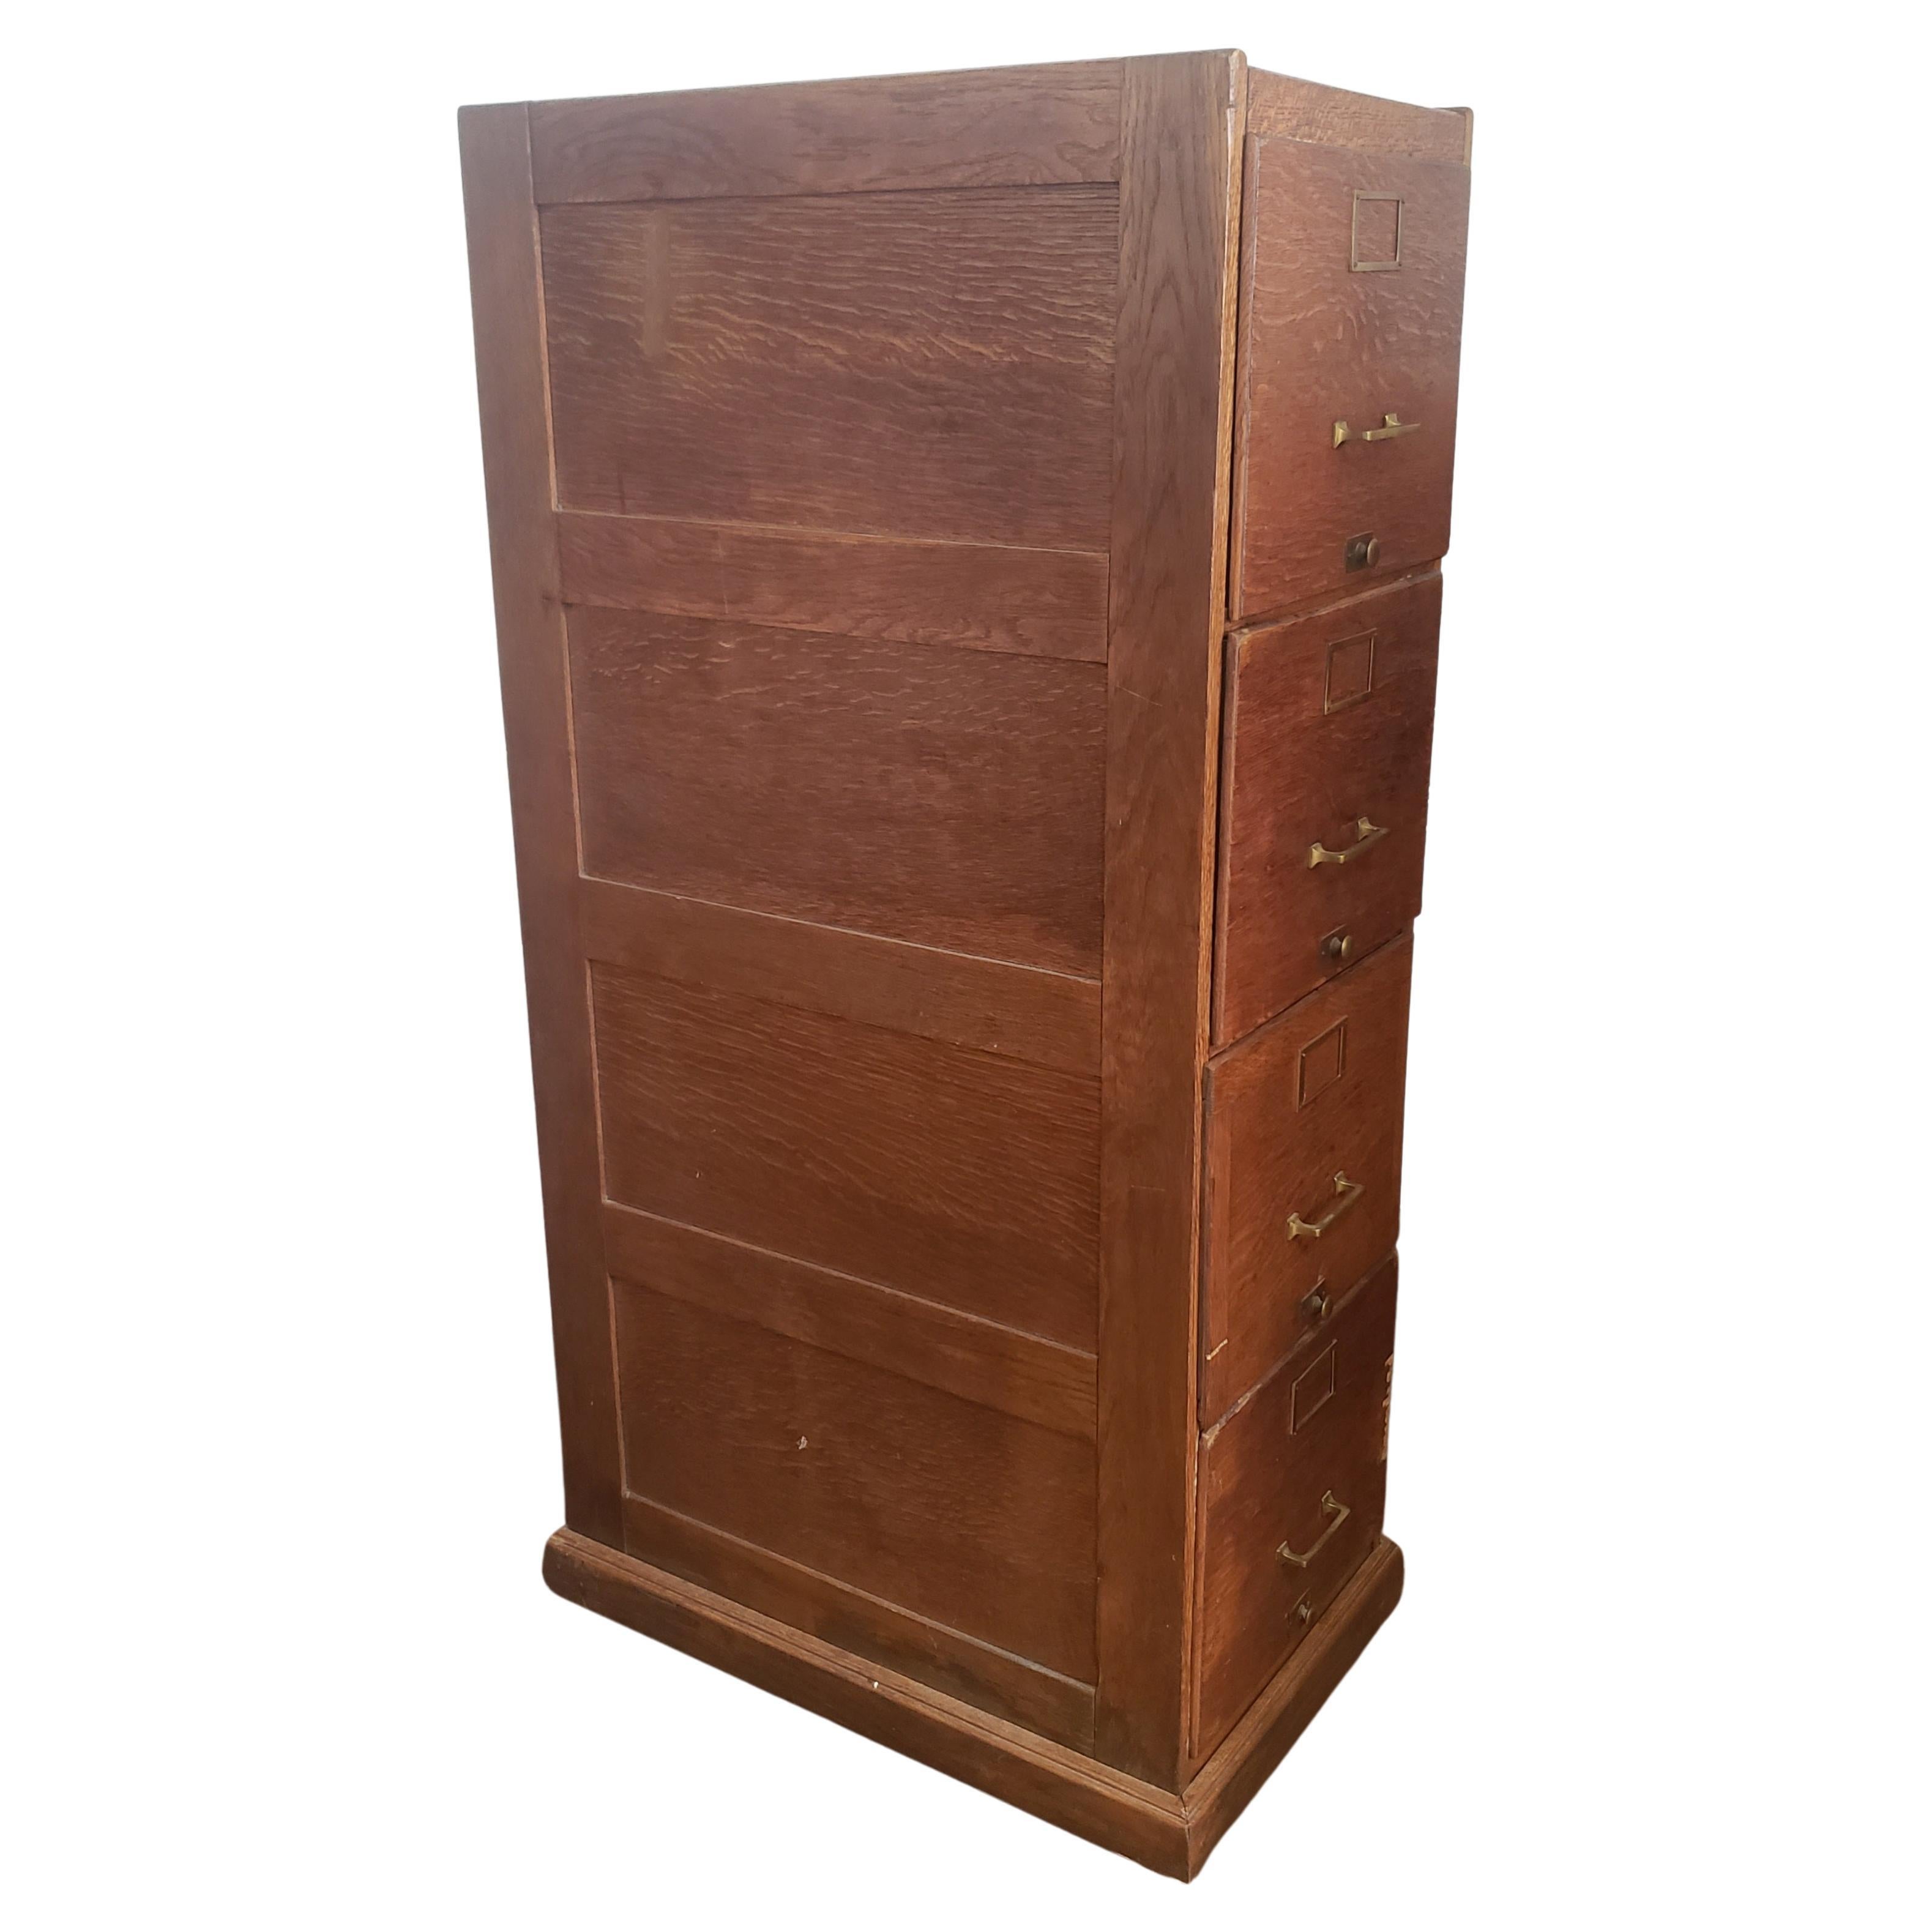 1920s oak panelized four drawer file cabinet. Heavy duty. Had been refinished and looks great with age patina.
All drawers working smoothly. Deep enough for both legal and letter size file folders. Will make a statement piece in your